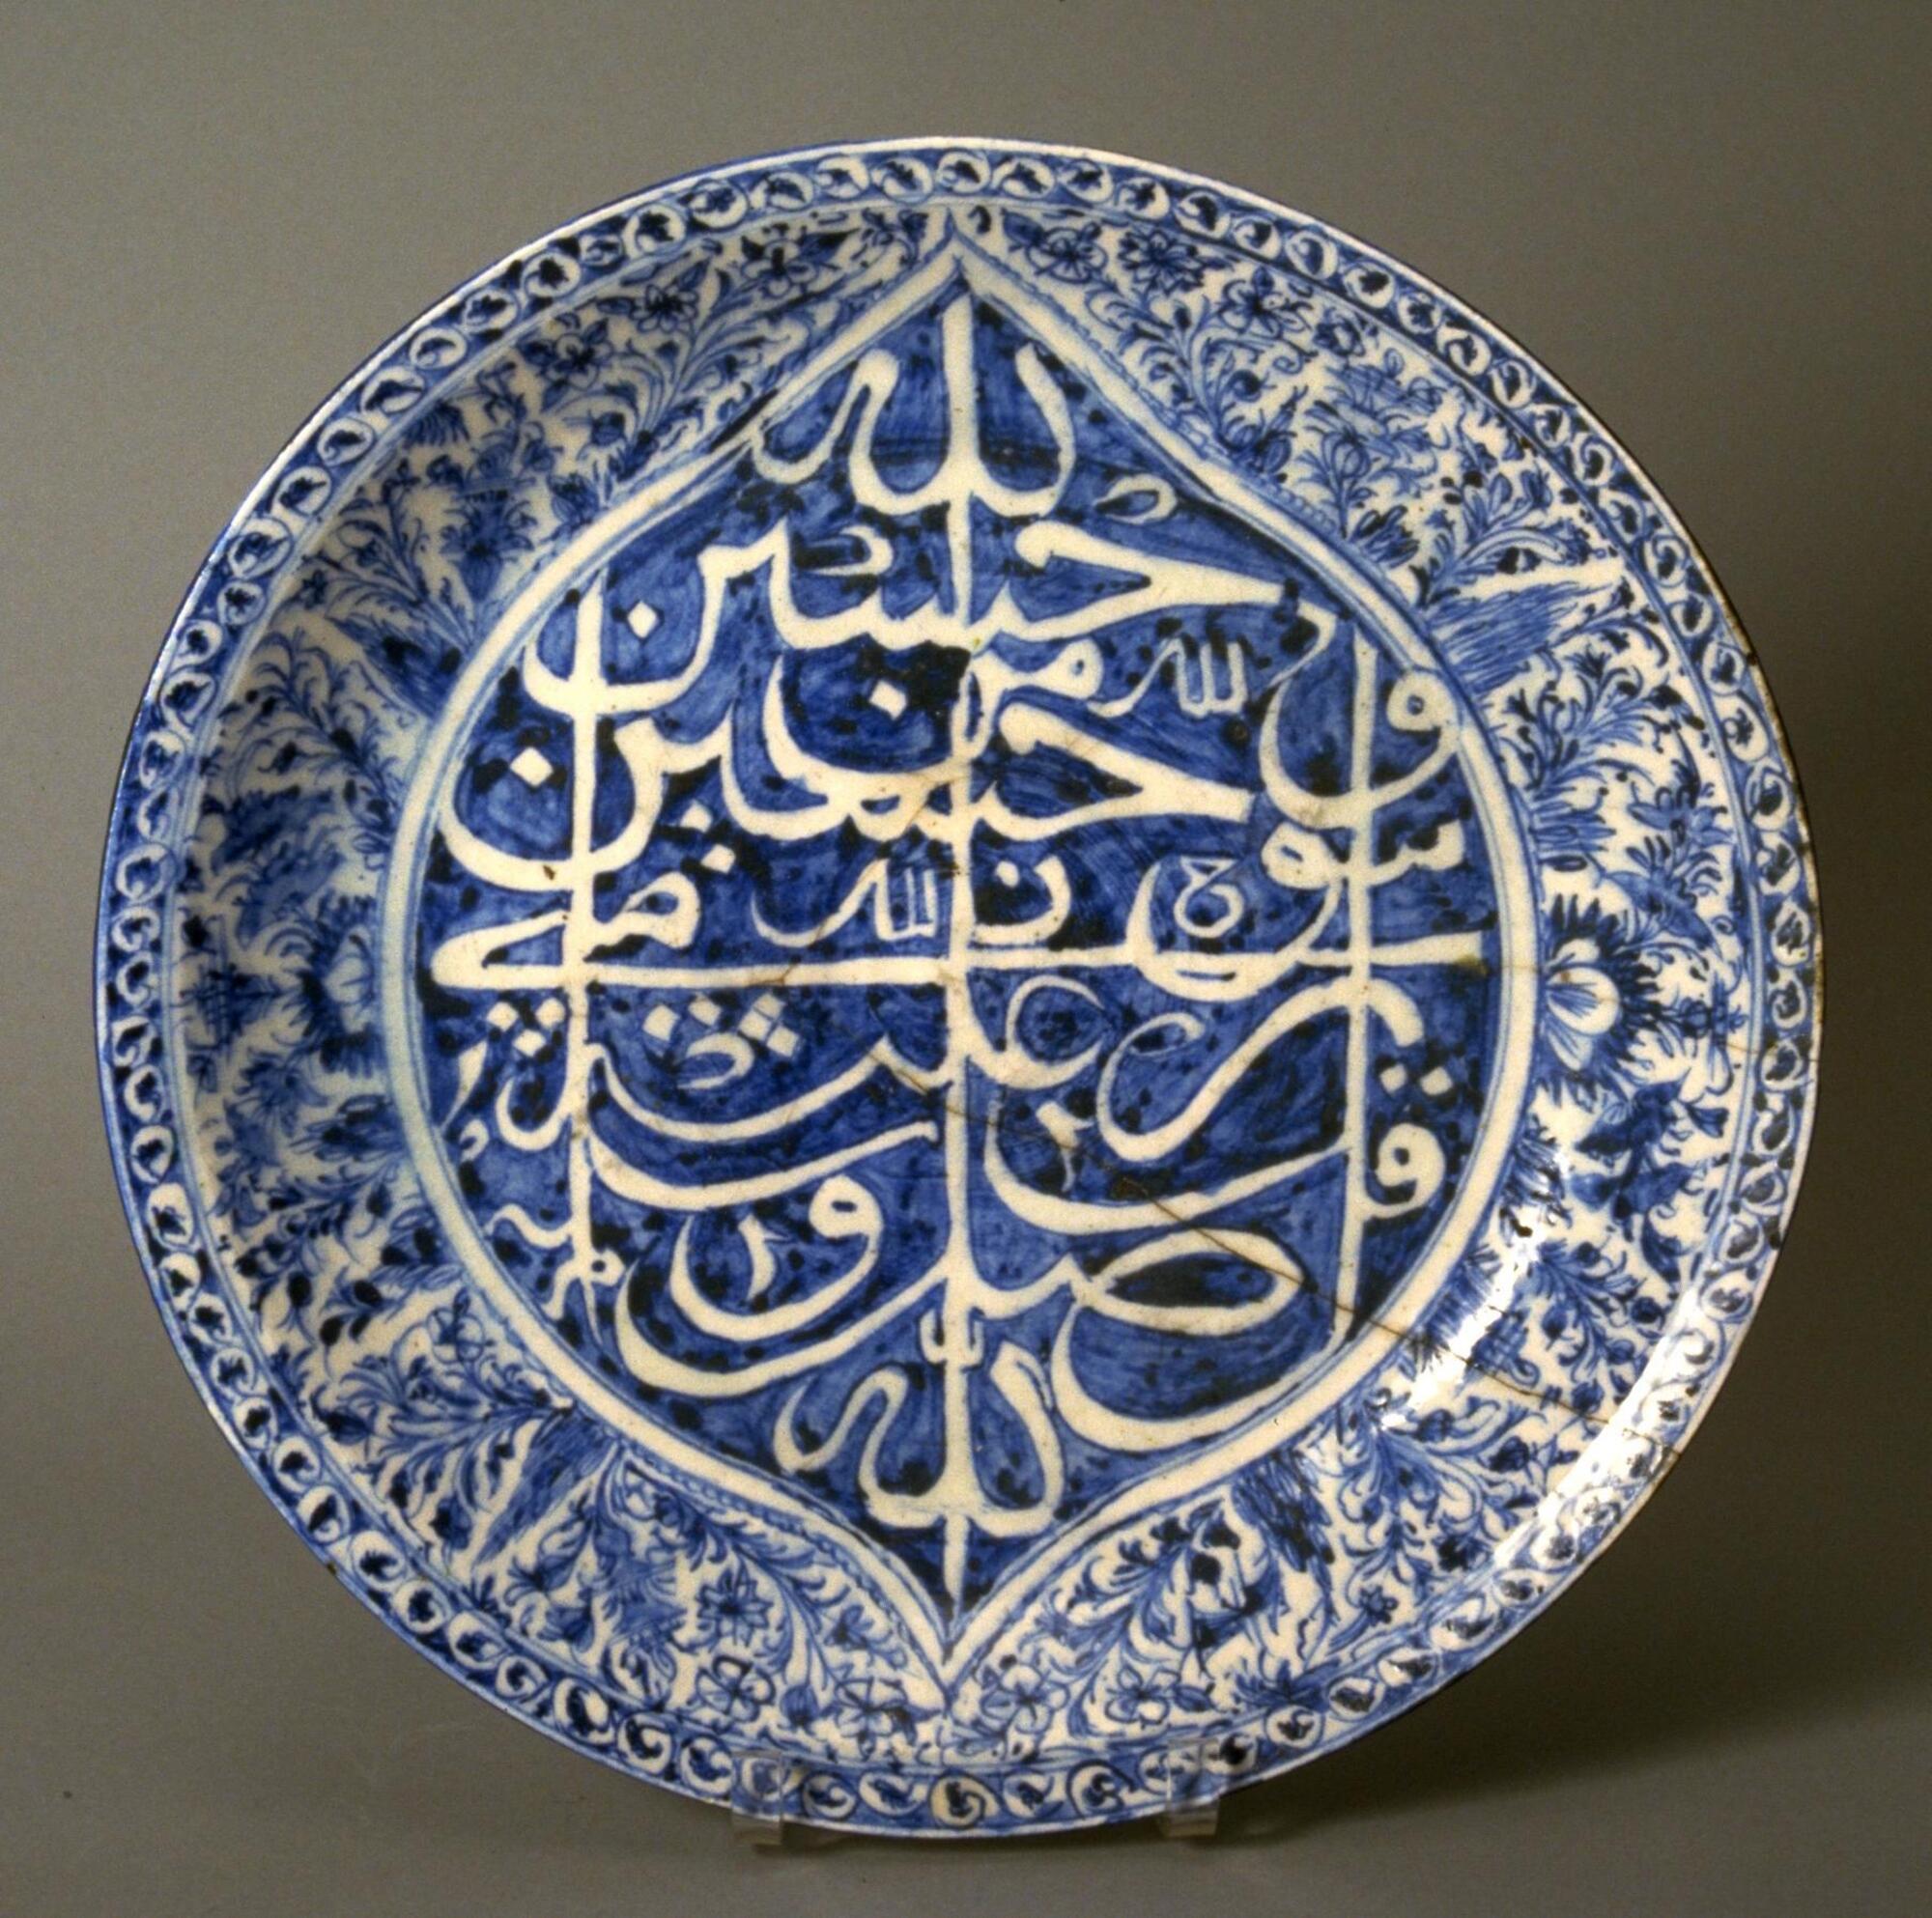 A blue and white platter. White porcellanous body with painting in blue under a clear glaze slightly tinged with blue-green.